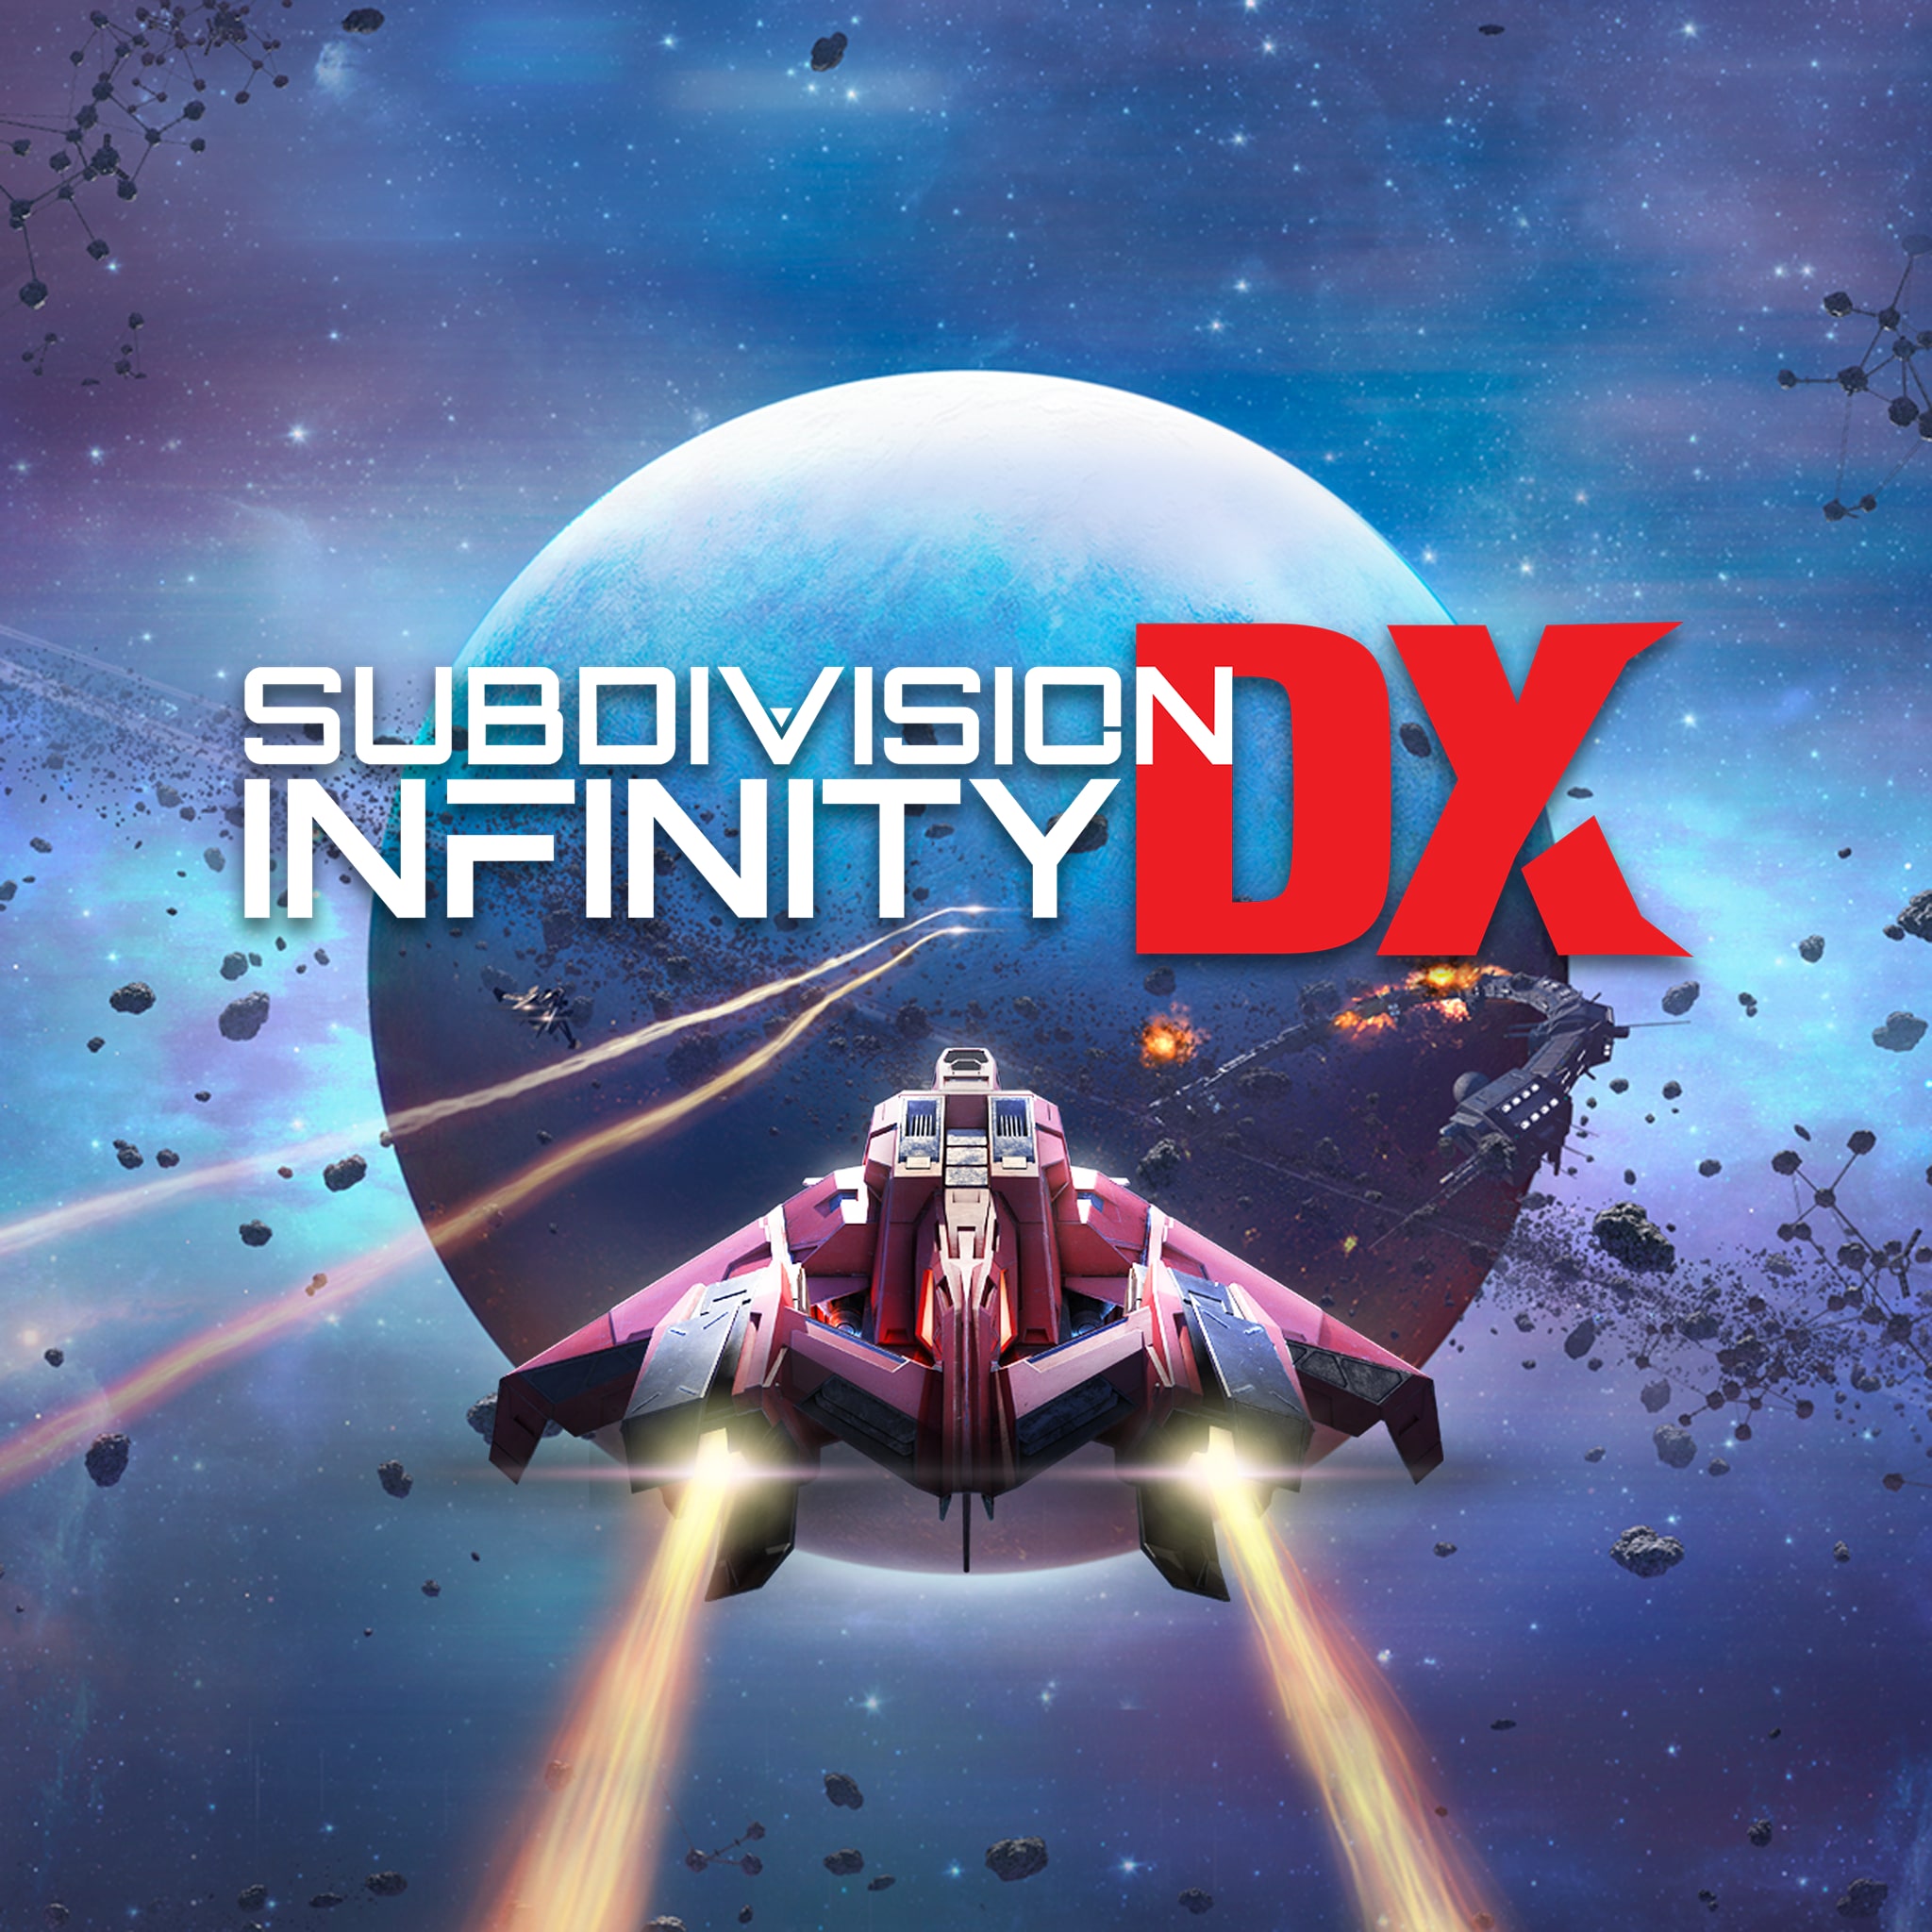 Subdivision Infinity DX cover